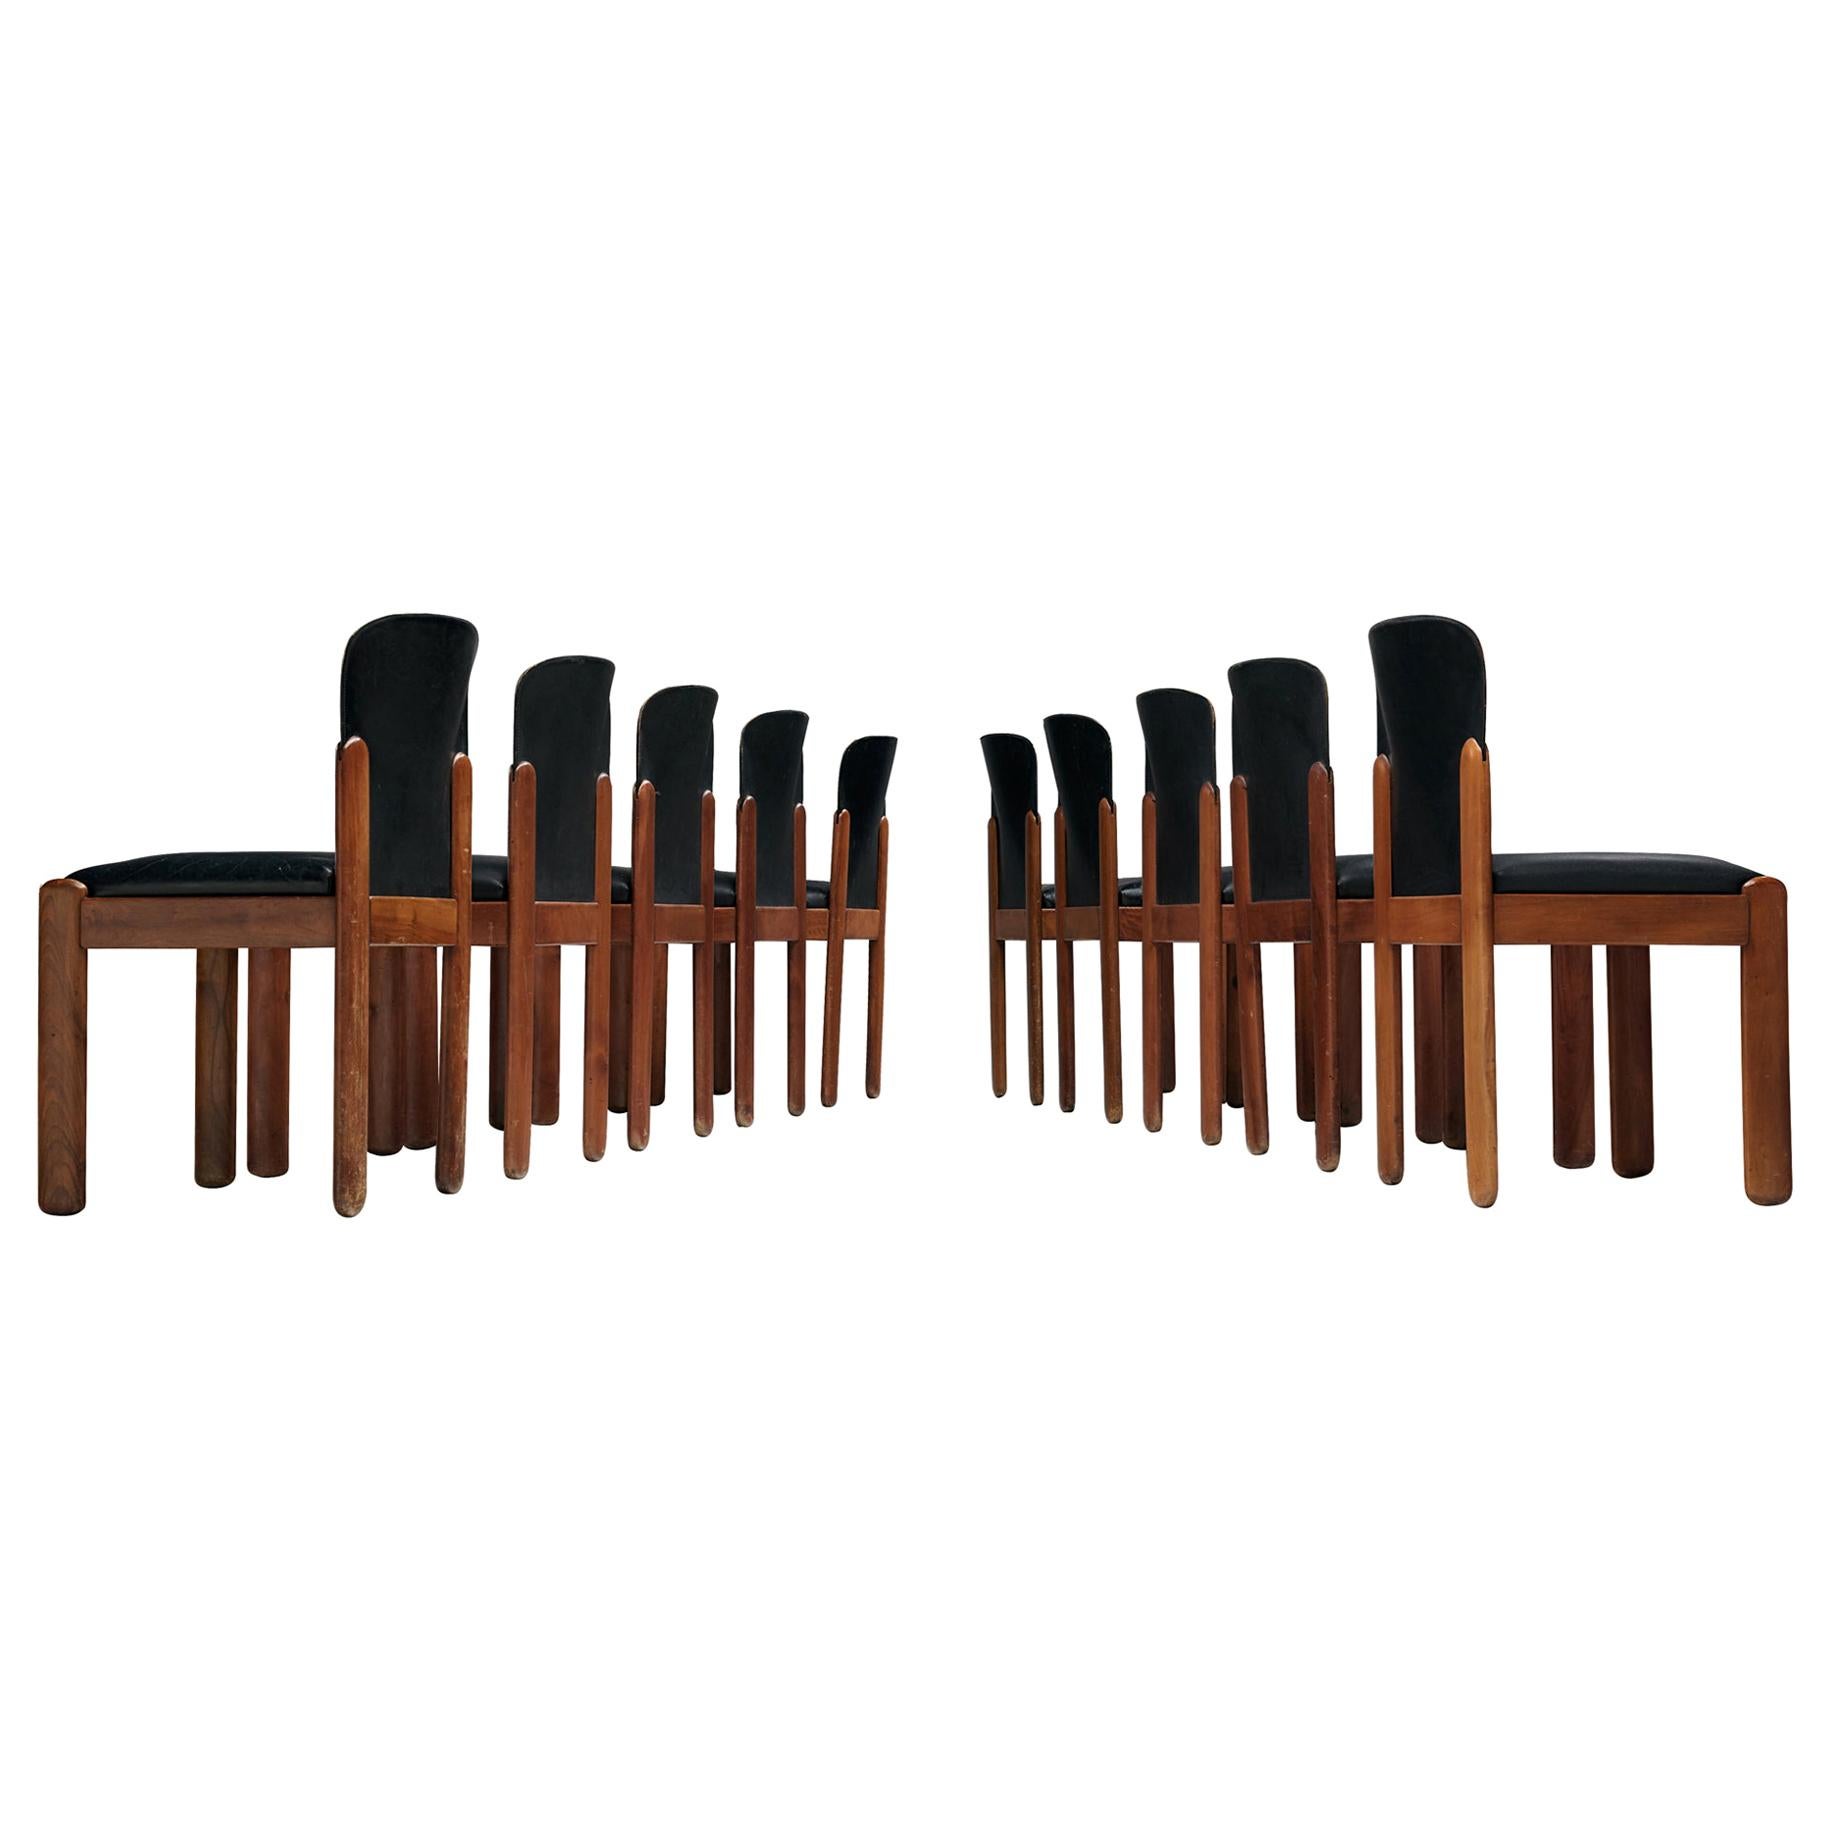 Silvio Coppola for Bernini Italy, set of ten chairs, black leather and stained beech, Italy, 1960s.
 
Set of ten chairs by Italian designer Silvio Coppola. These chairs have a cubic and architectural appearance. The base consist of four straight